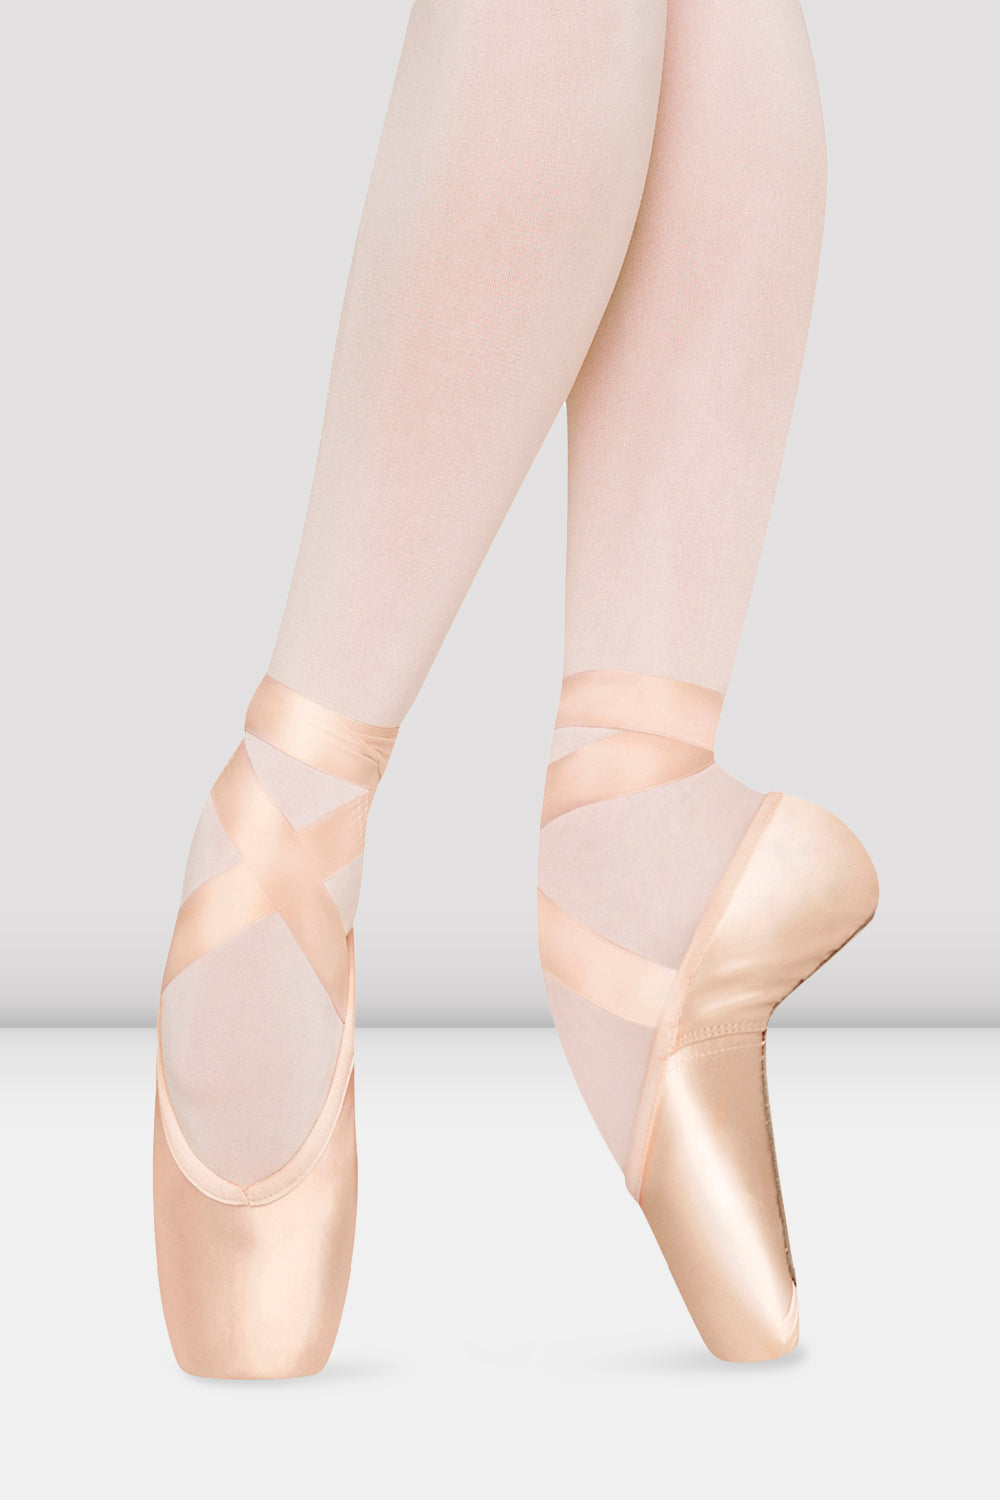 BLOCH Synergy Pointe Shoes, Pink Satin